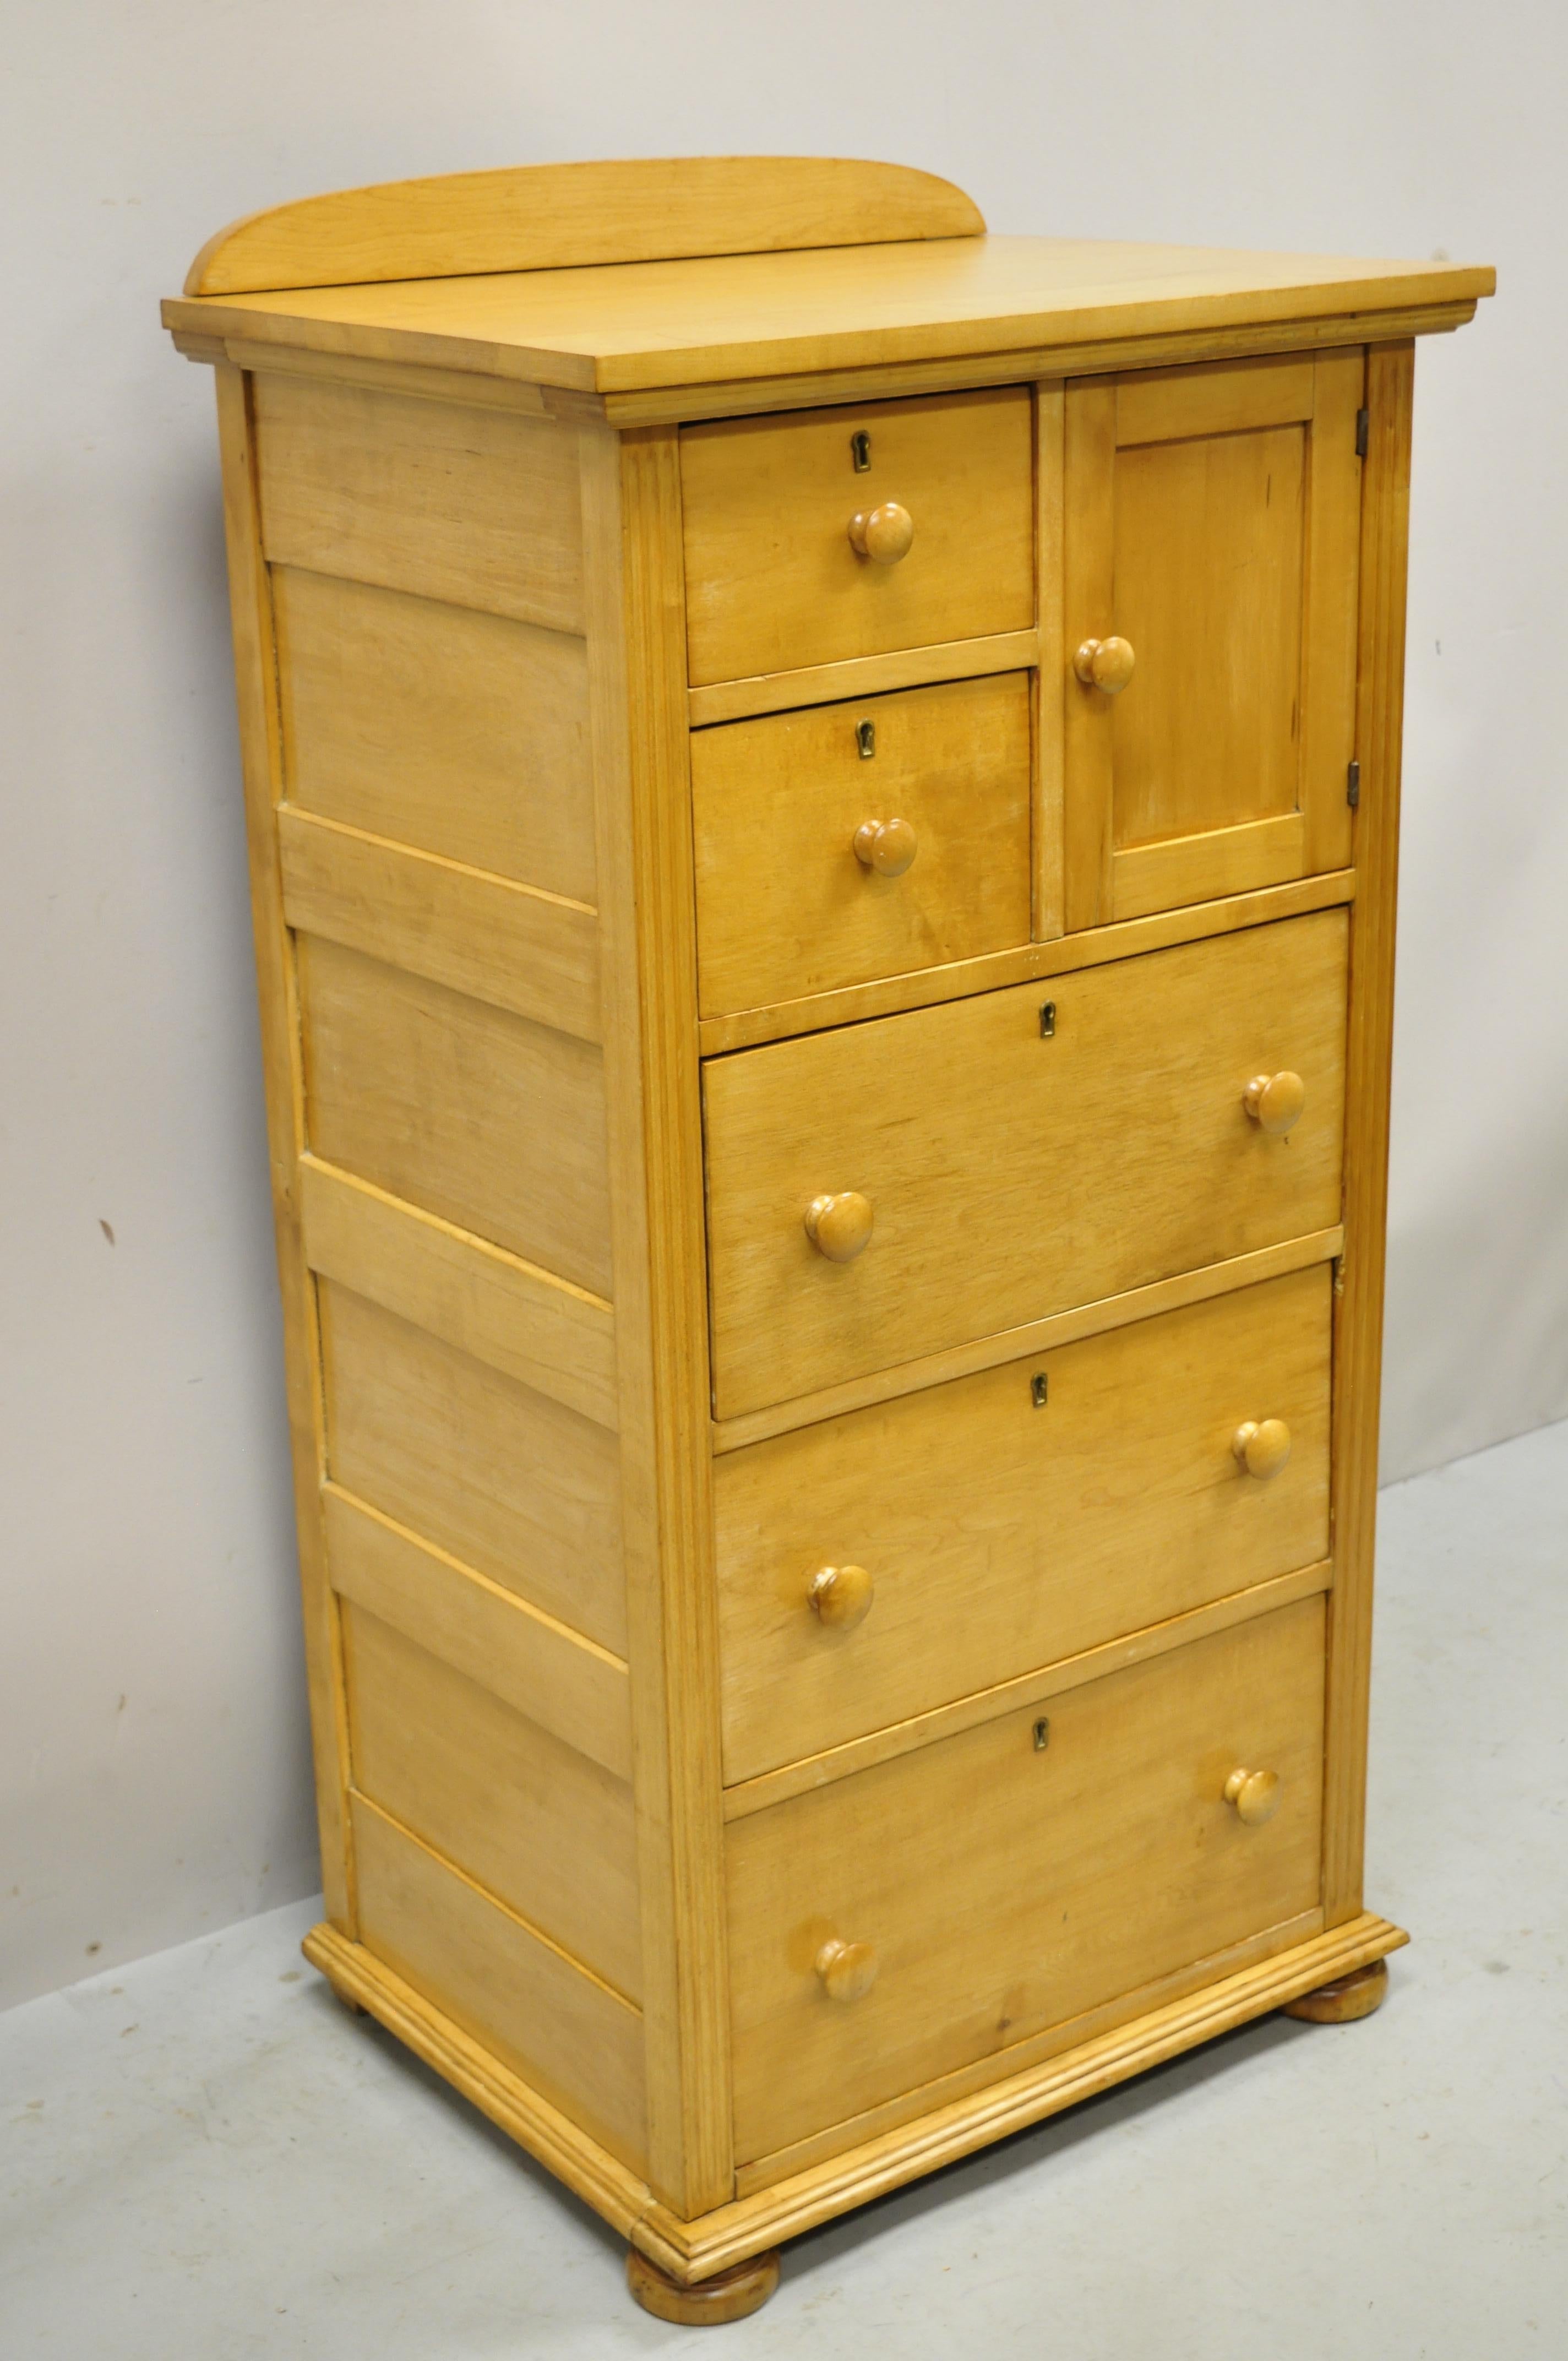 Antique maple wood American Empire tall chest washstand dresser. Item features bun feet, panel back and sides, backsplash, solid wood construction, beautiful wood grain, 1 swing door, no key, but unlocked, 5 dovetailed drawers, very nice antique